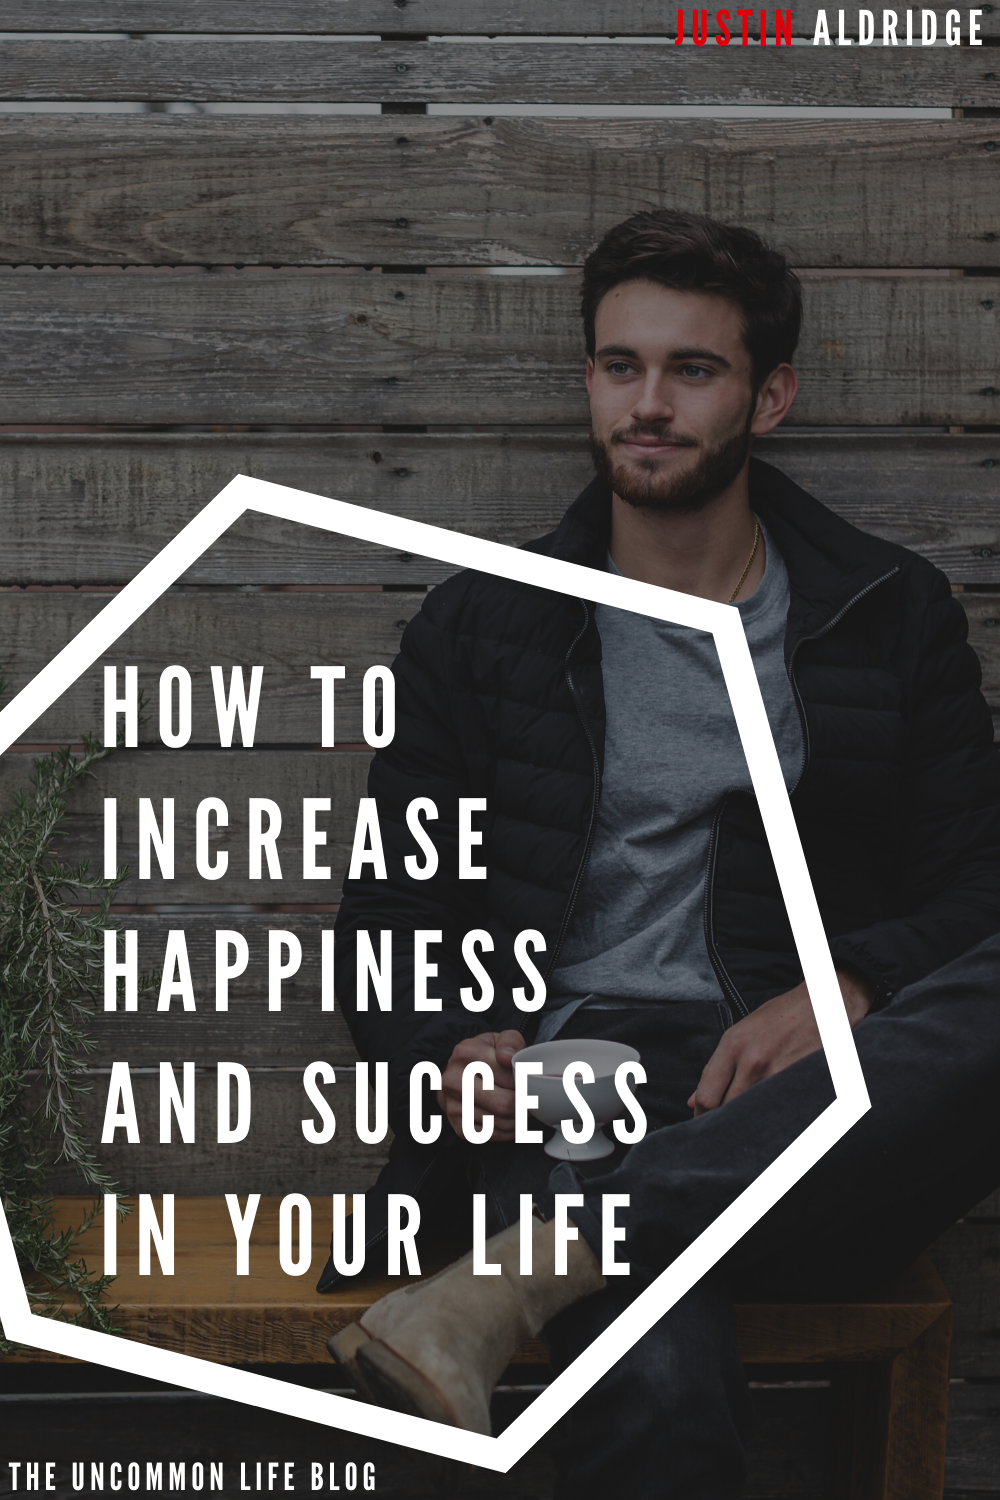 Man sitting on a bench with a cup of coffee behind the text, "How to increase happiness and success in your life" in white font